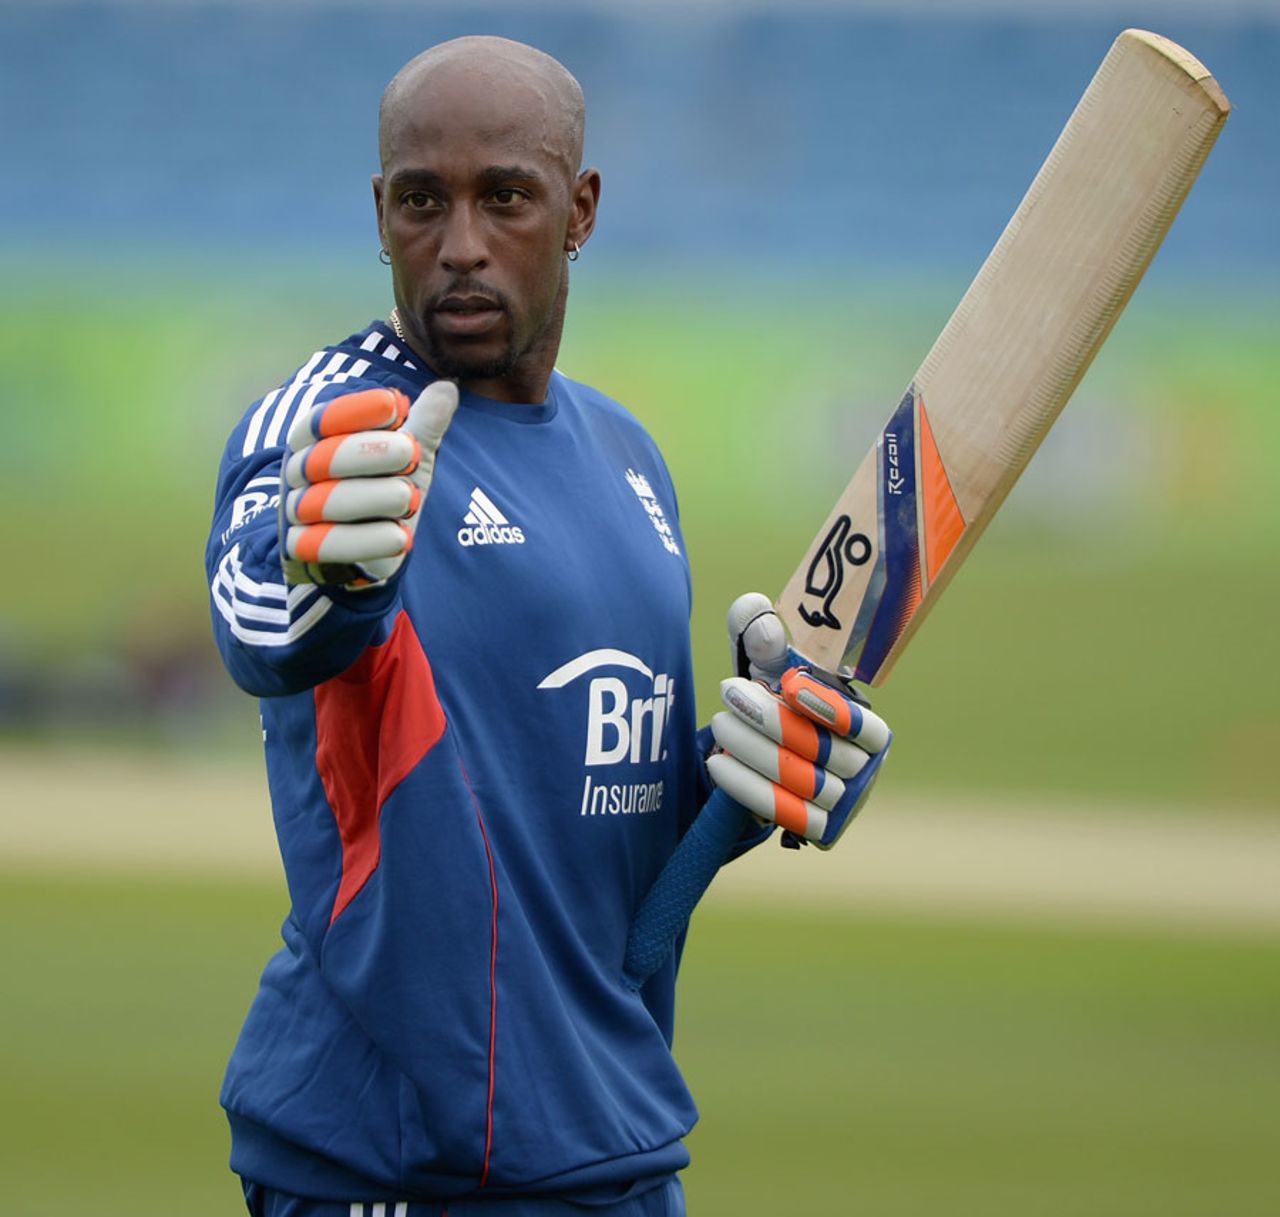 Michael Carberry waits to bat during a nets session, Headingley, September 5, 2013